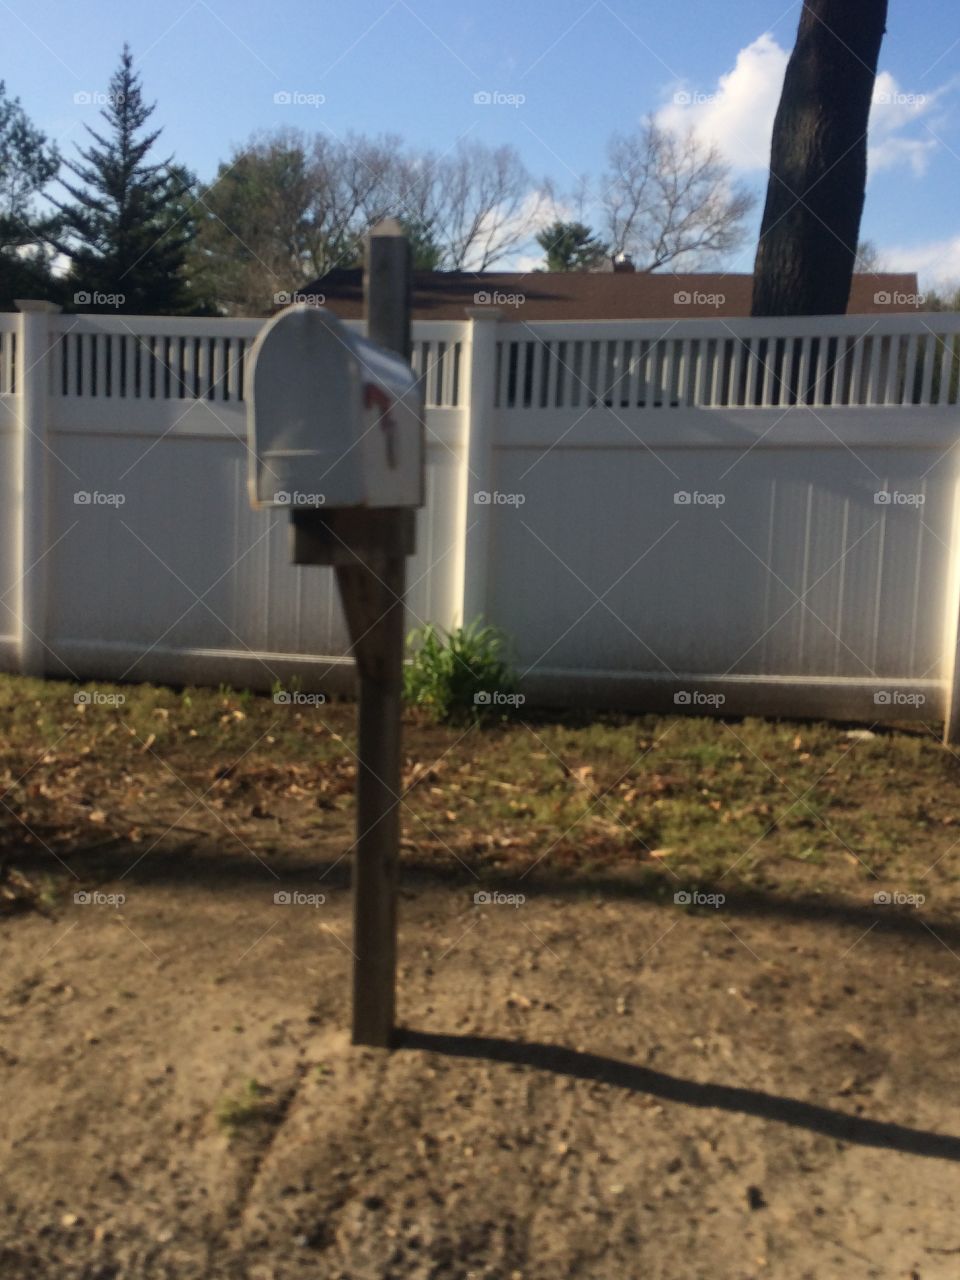 A random white picket fence with the mailbox. Modern middle class. 